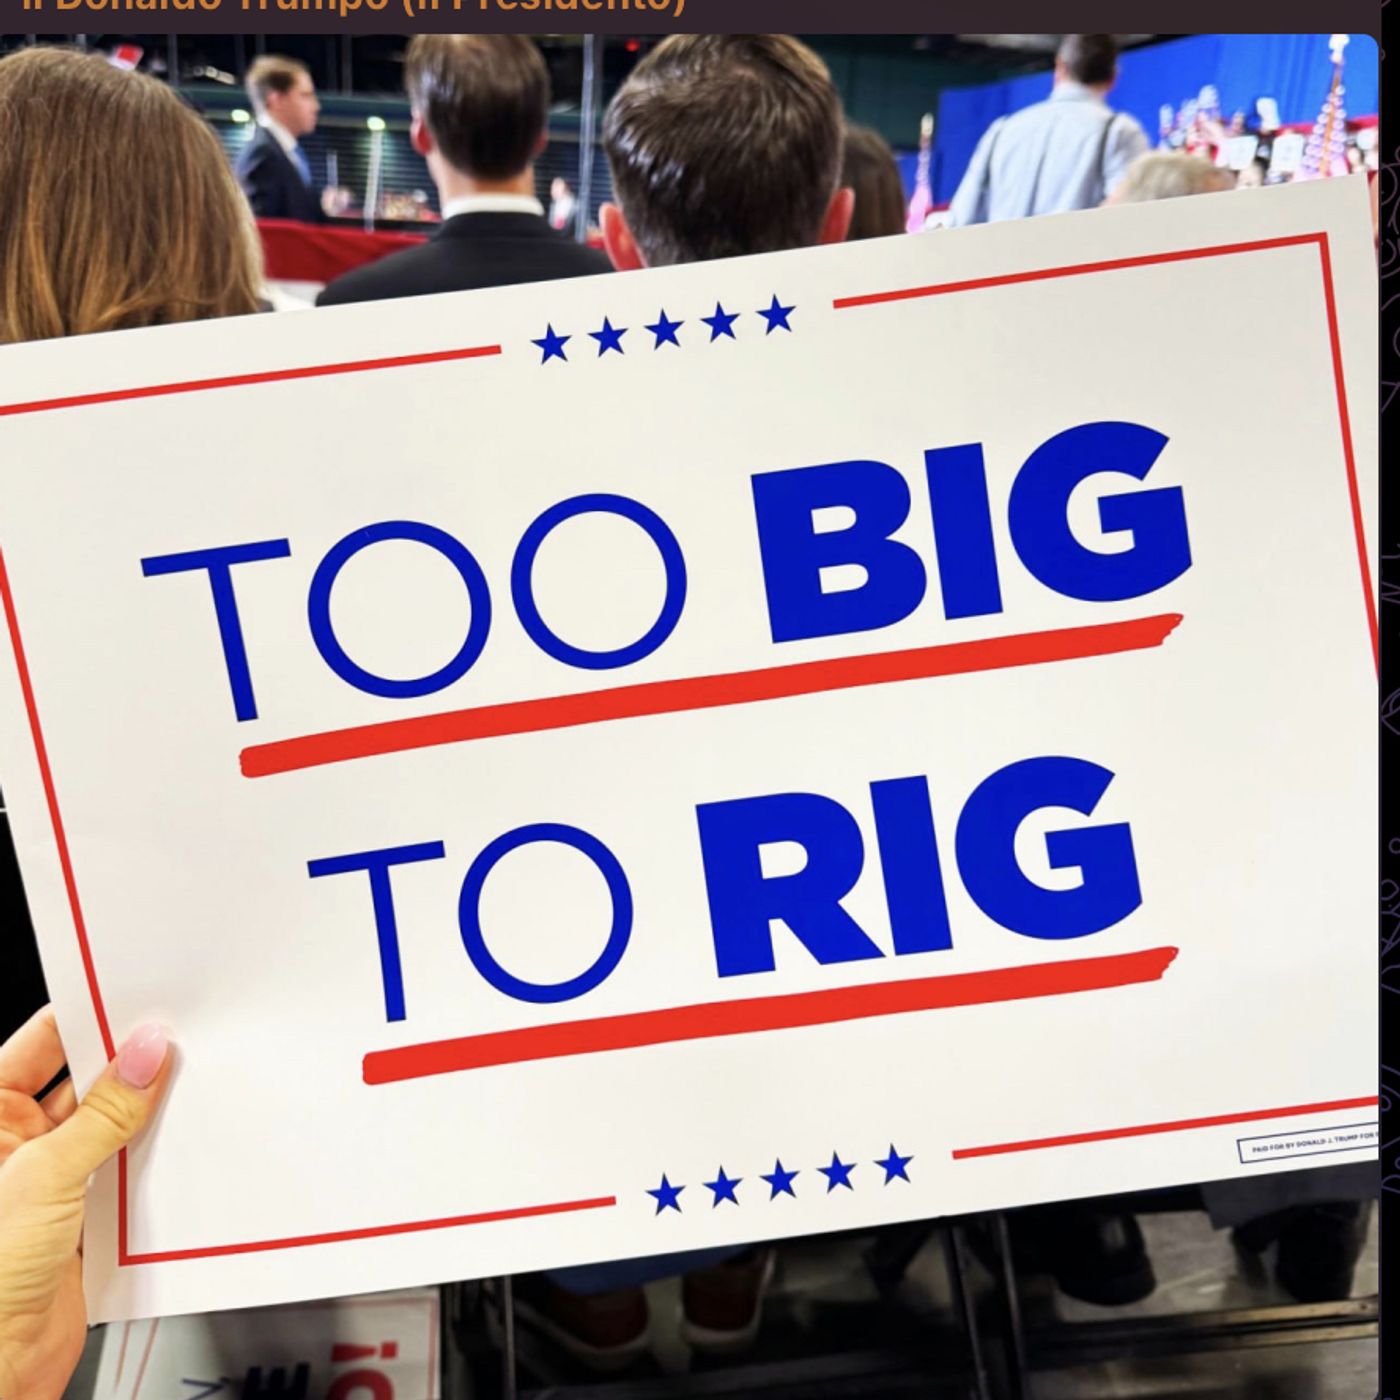 Will Trump’s election be ’too big to rig’?